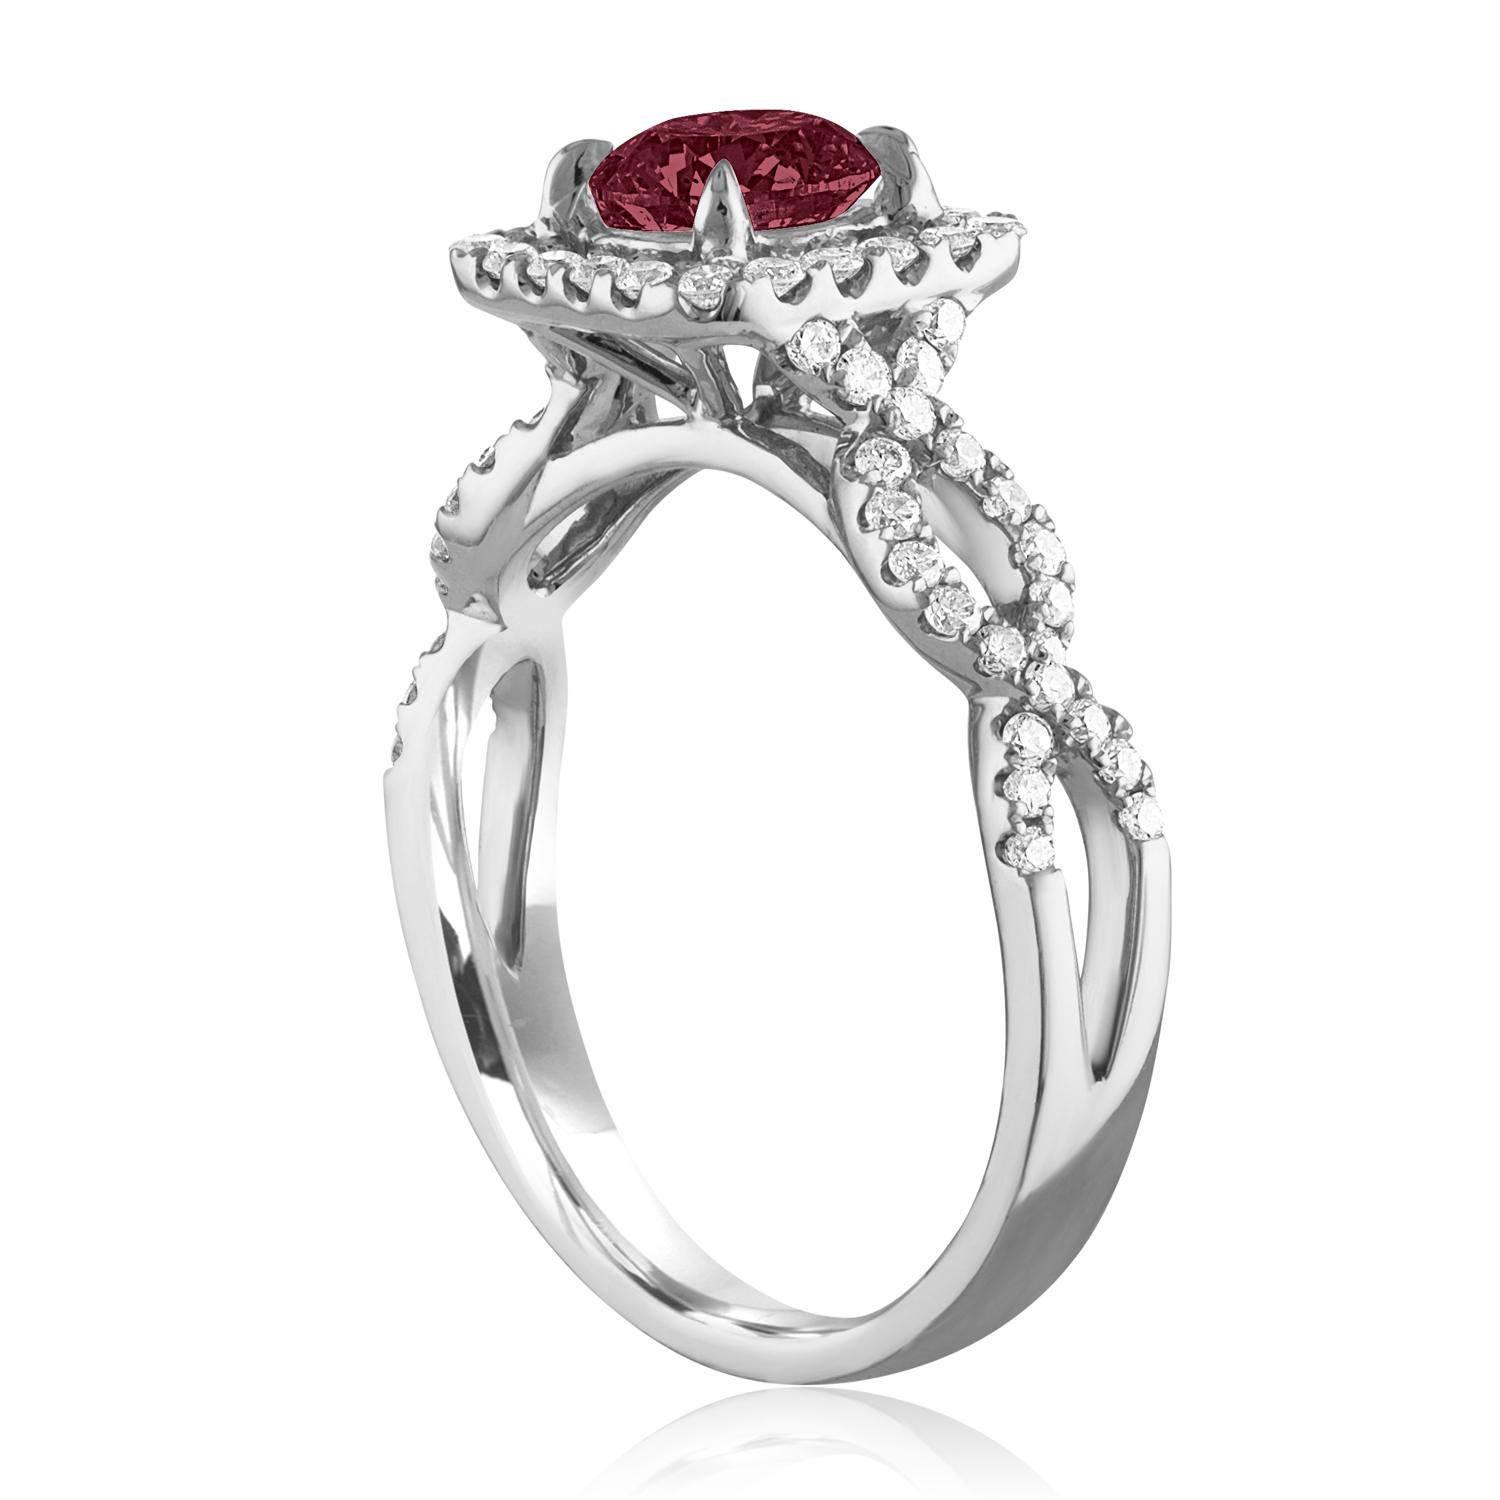 Beautiful Square Halo with Criss Cross Shank Ring
The ring is 18K White Gold
The Center Stone is a Round Ruby 1.04 Carats
The Ruby is AGL Certified Heated
There are 0.44 Carats in Diamonds F/G VS/SI
The ring is a size 6.5, sizable.
The ring weighs